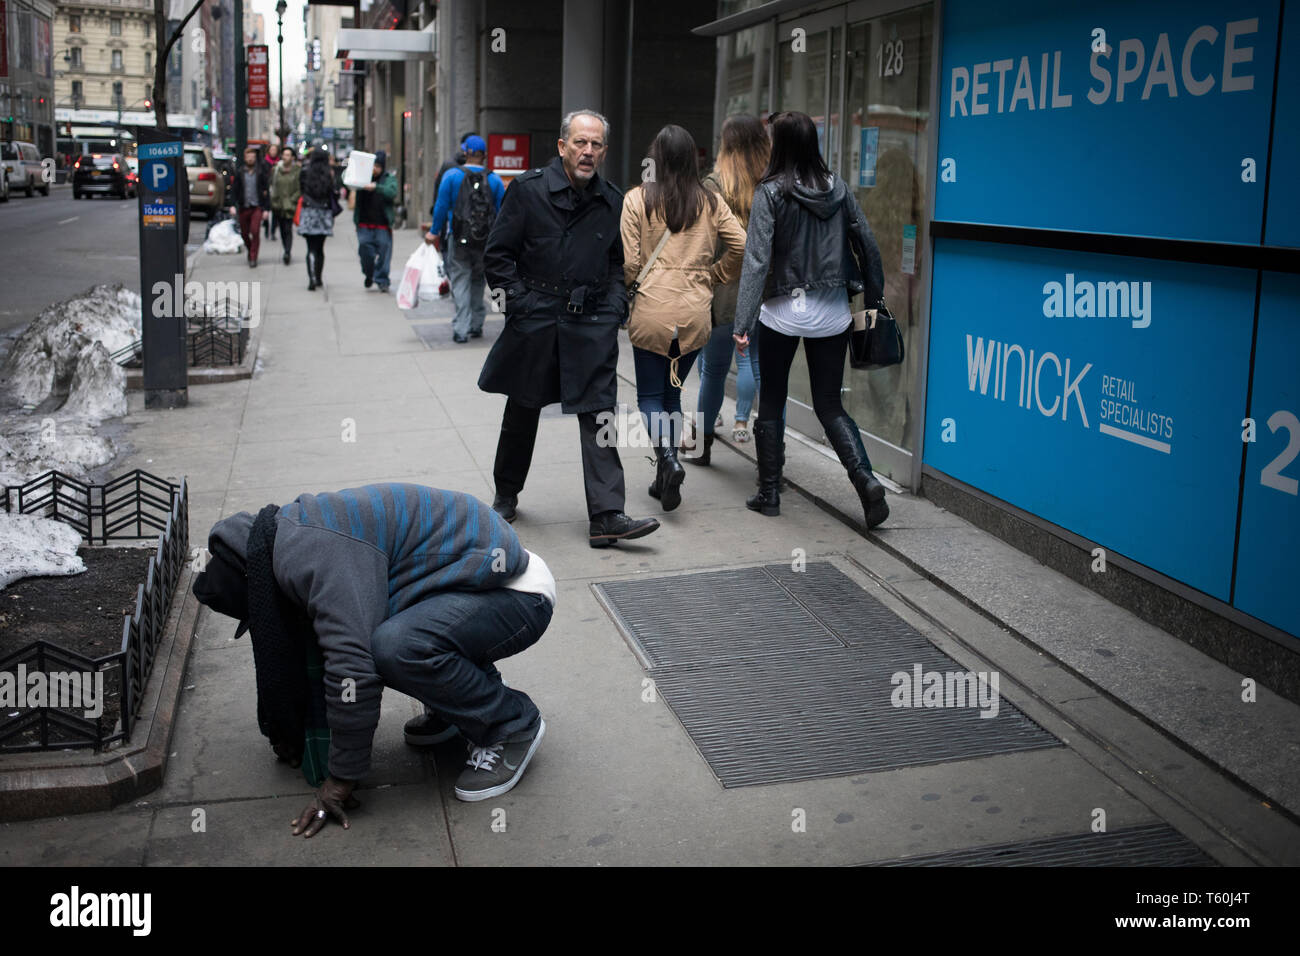 New York City, NY - March 06, 2017: Unidentified Homeless man crouching in the street while other pedestrians  pass by in New York City, NY Stock Photo